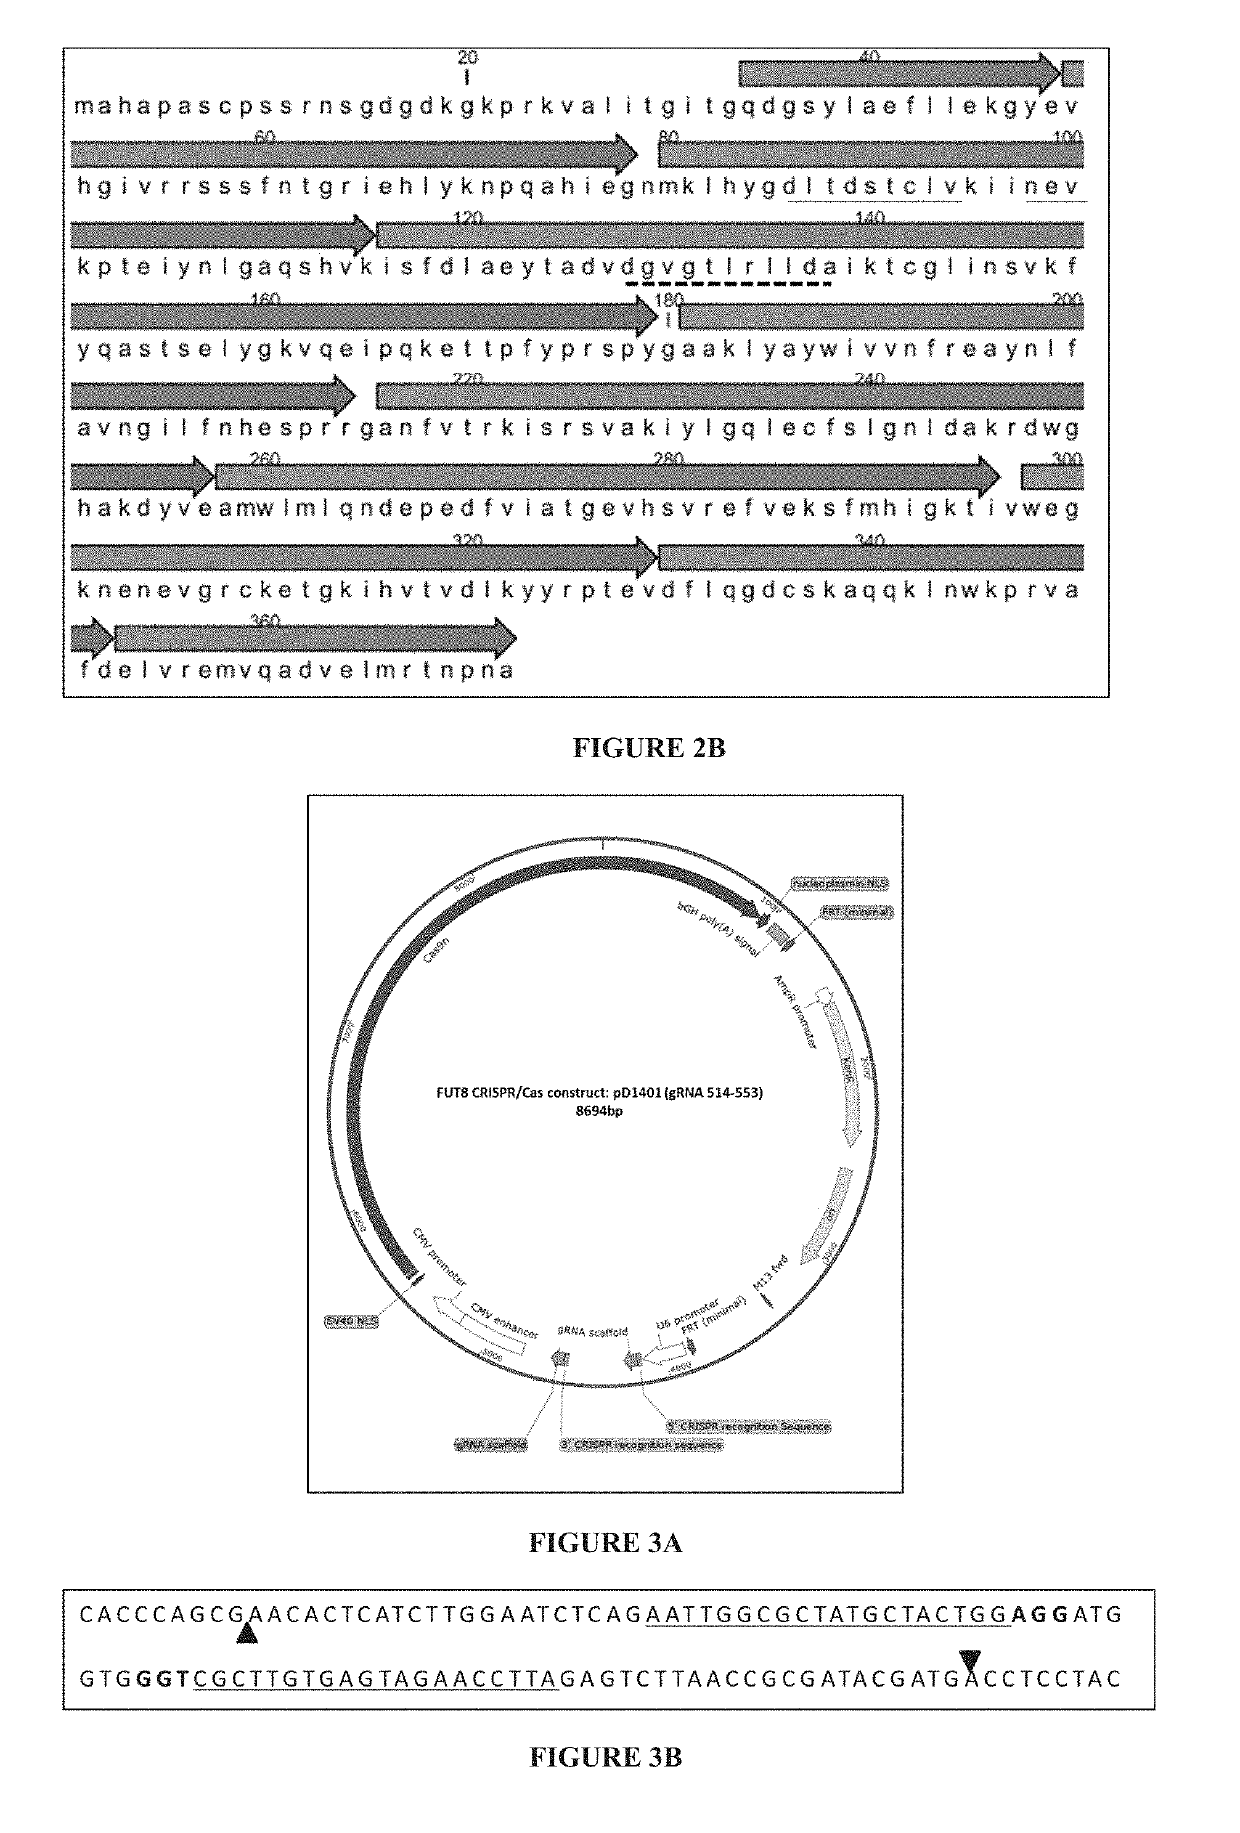 Dna-binding domain of crispr system, non-fucosylated and partially fucosylated proteins, and methods thereof